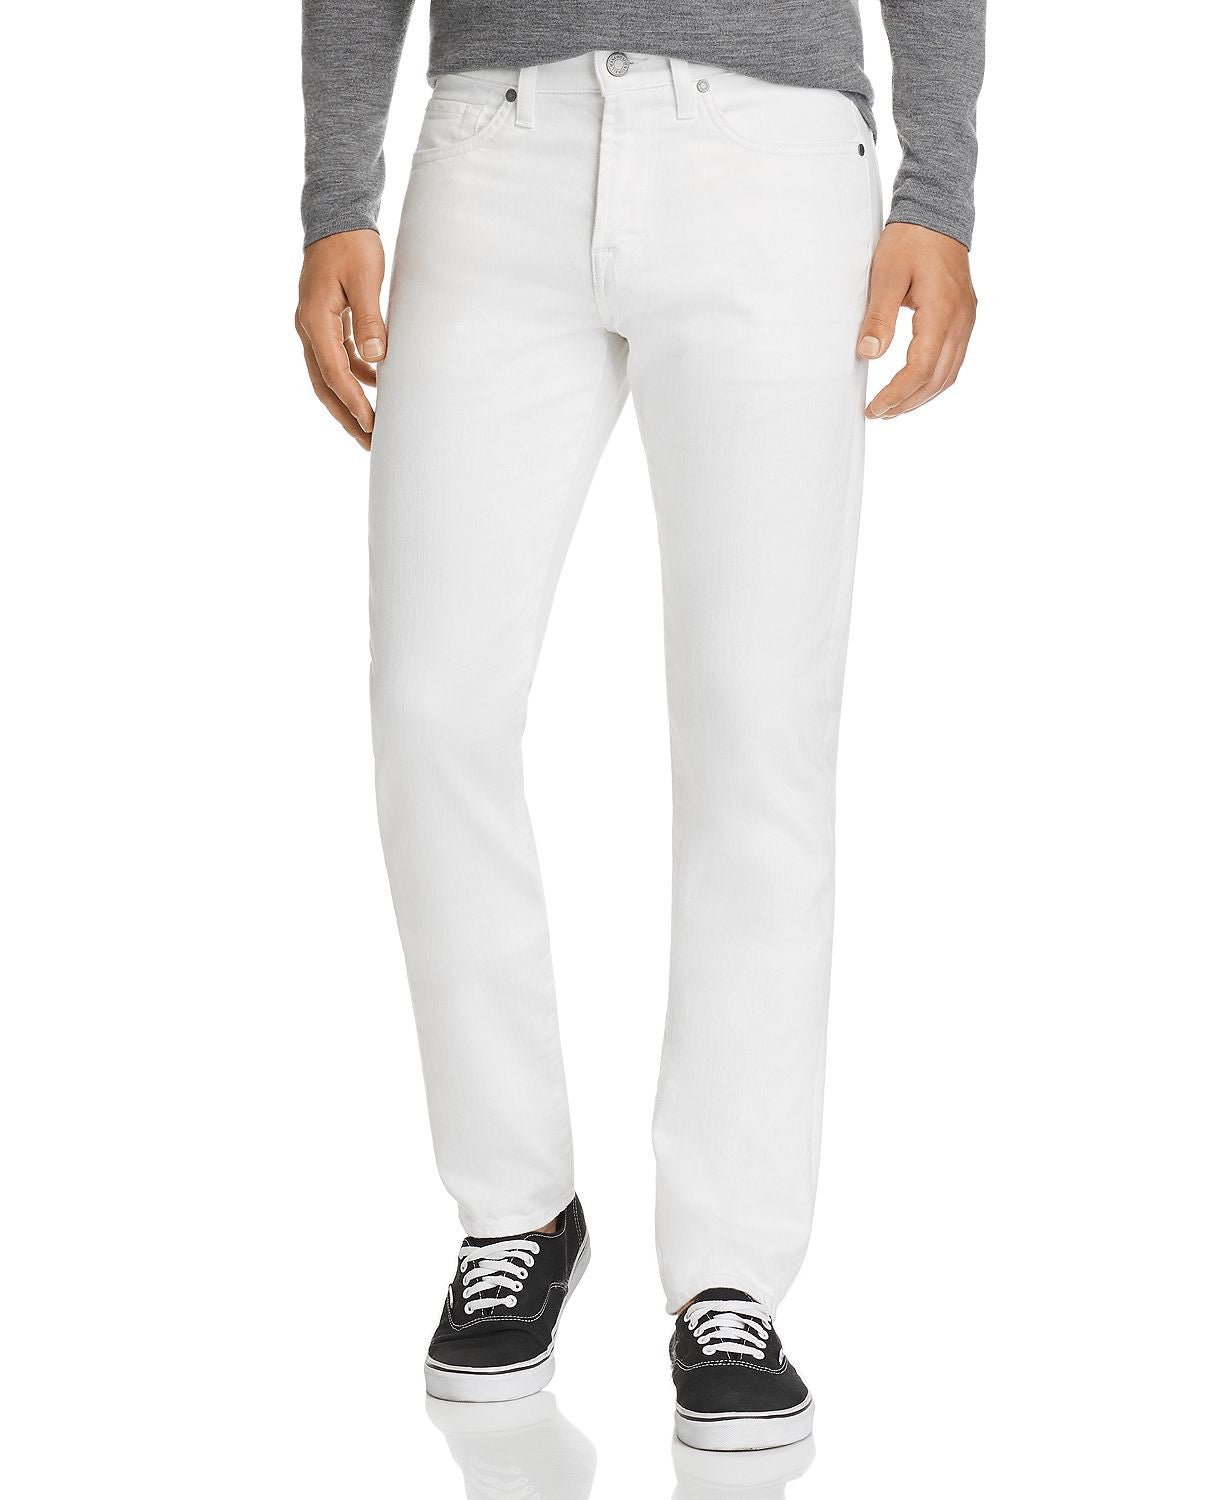 7 For All Mankind Adrien Slim Fit Jeans In White White